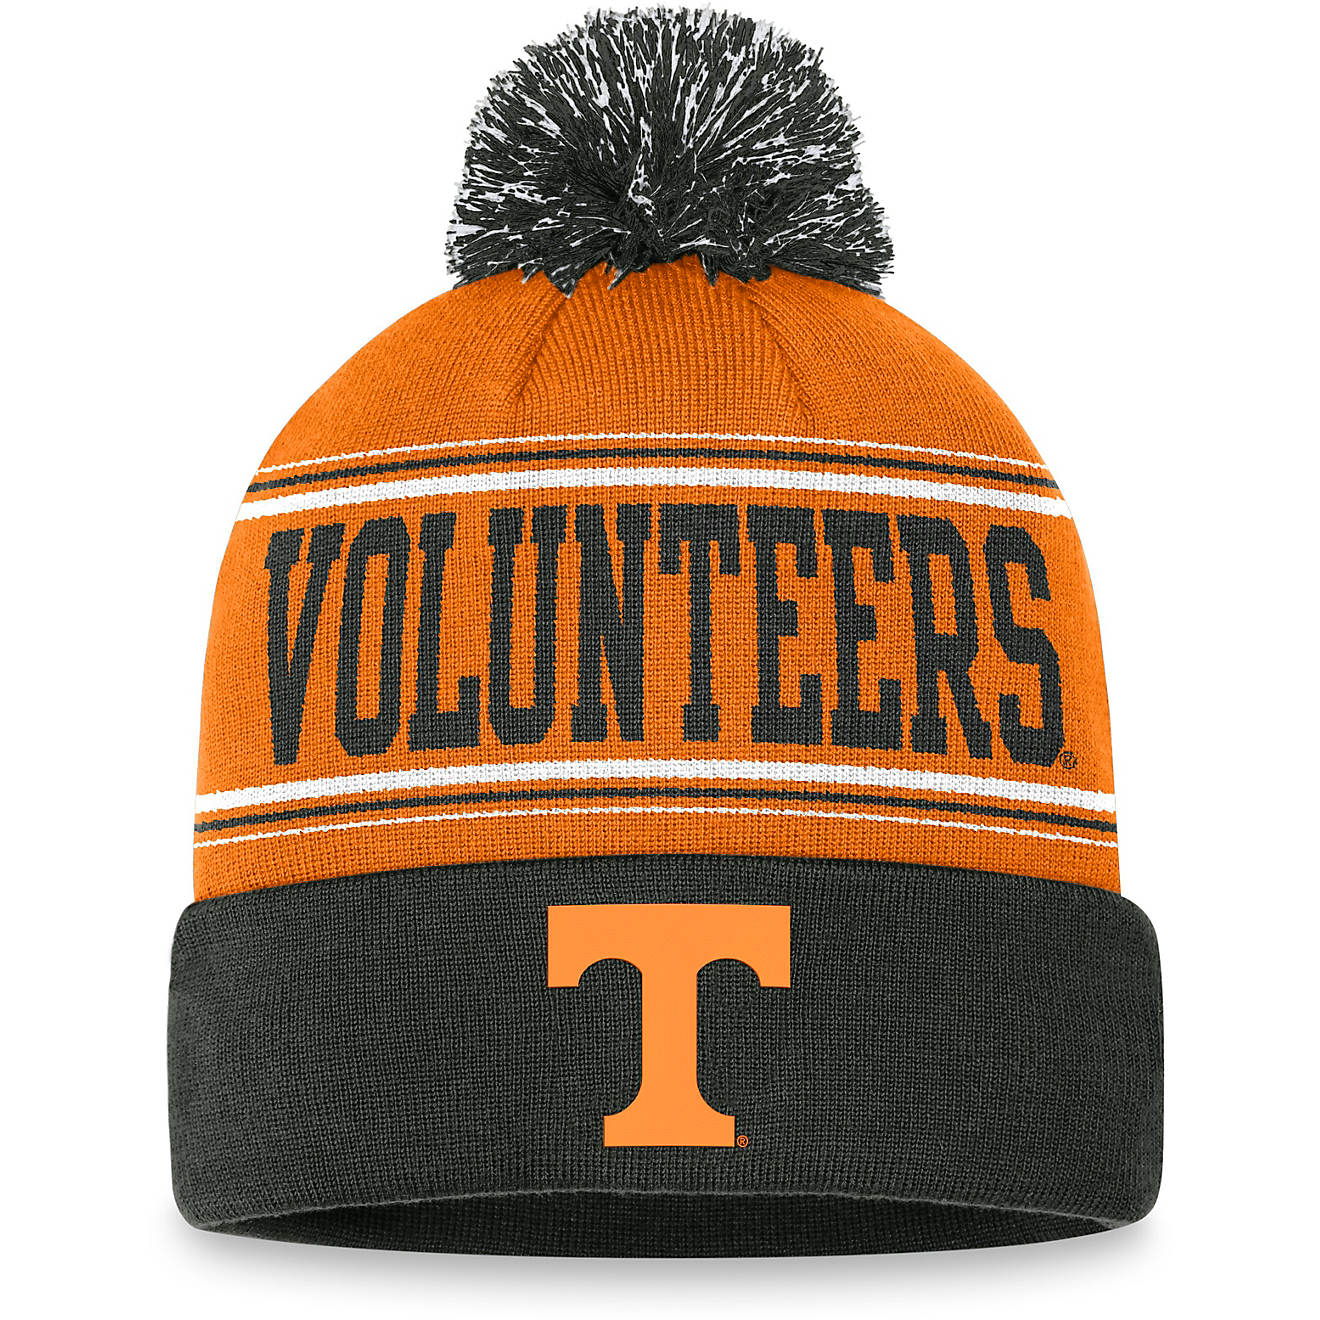 Tennessee Volunteers Top of the World Fashion Cuffed Pom Knit Hat